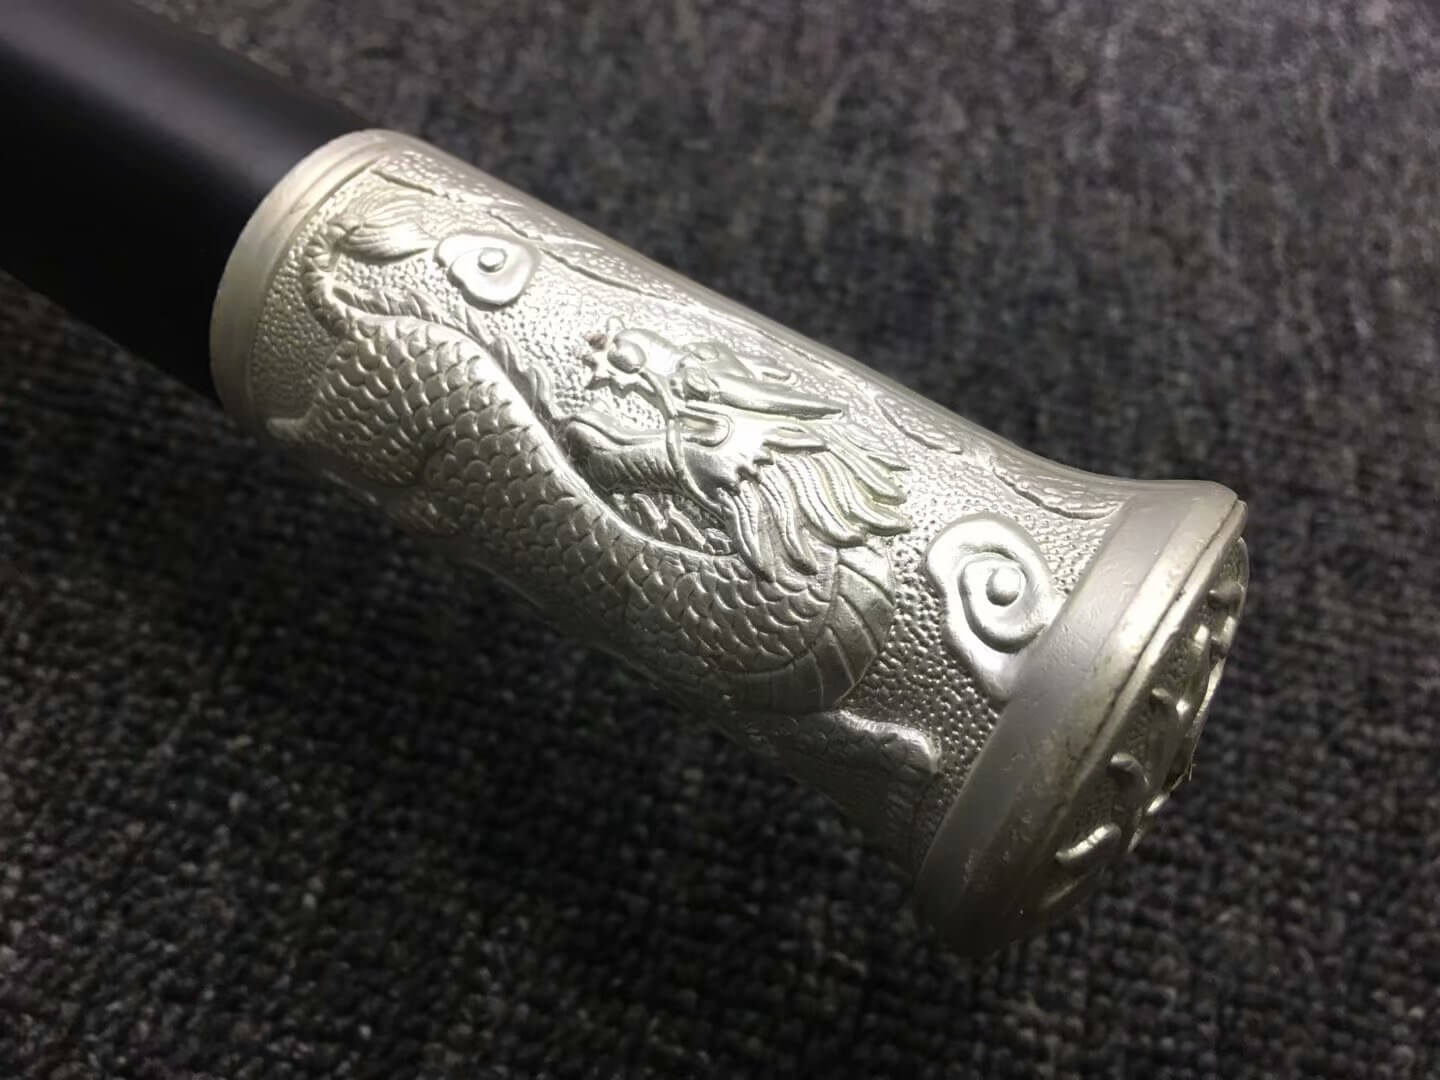 Broadsword,High carbon steel etch blade,Alloy,Leather scabbard - Chinese sword shop